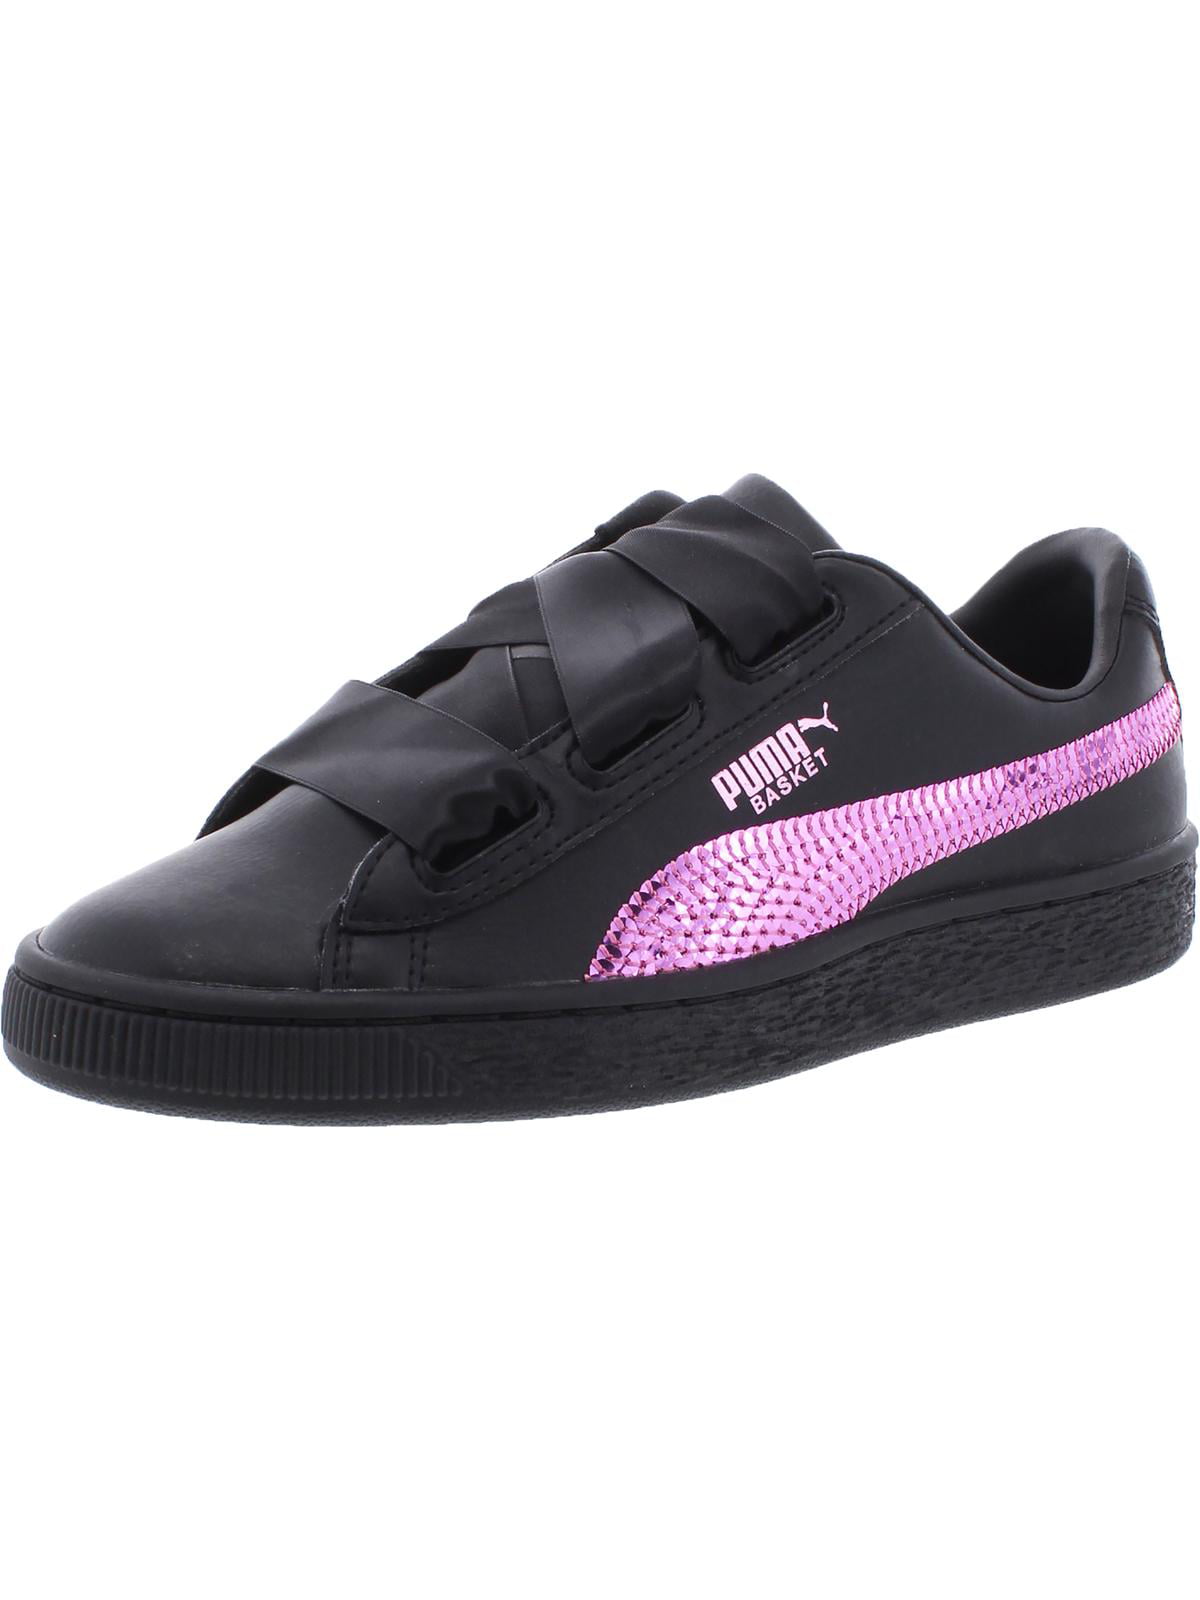 puma sneakers shoes for girls